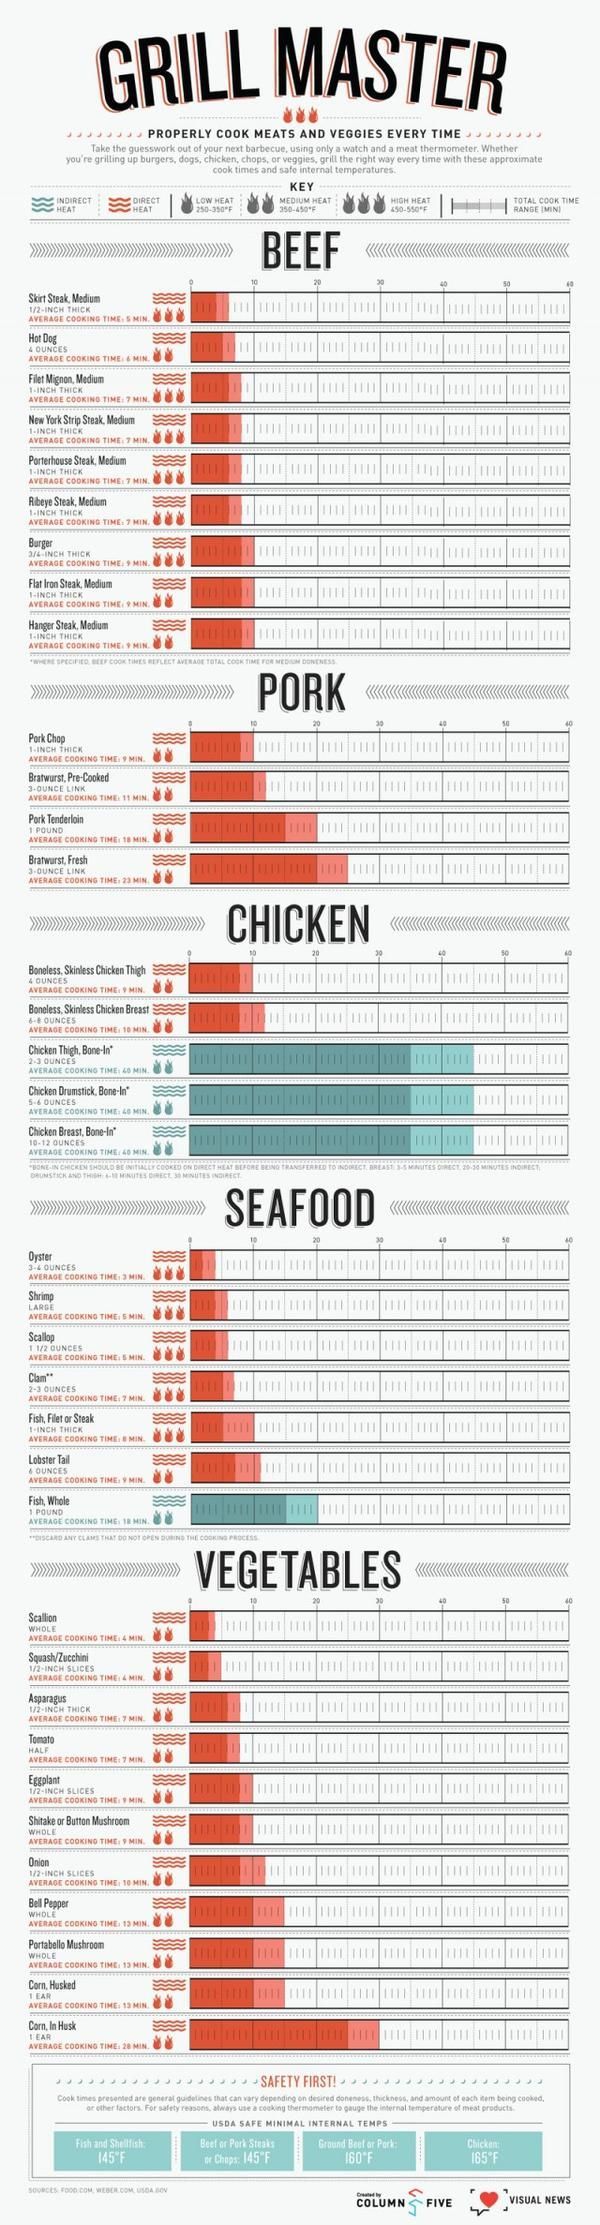 The Grill Master infographic will help you get your grill on as summer winds down. The chart is divided up by meat or vegetable type and shows on a timeline just how long each needs to be cooked. It